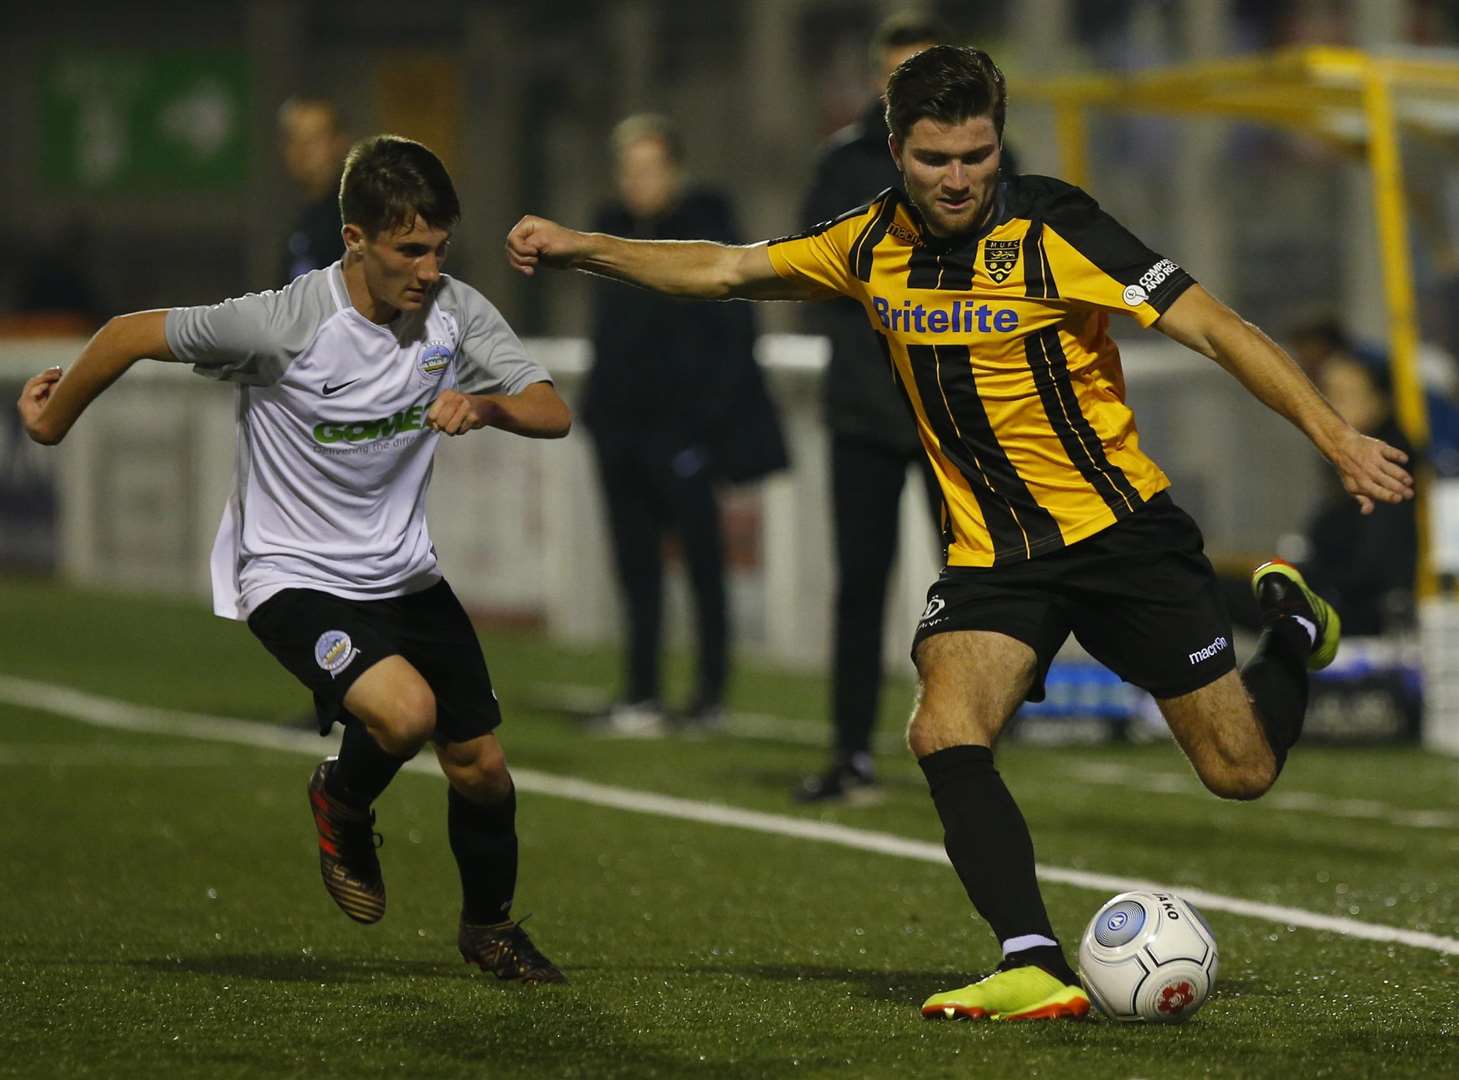 Dover's James Belcher closes down Maidstone's Ollie Muldoon Picture: Andy Jones